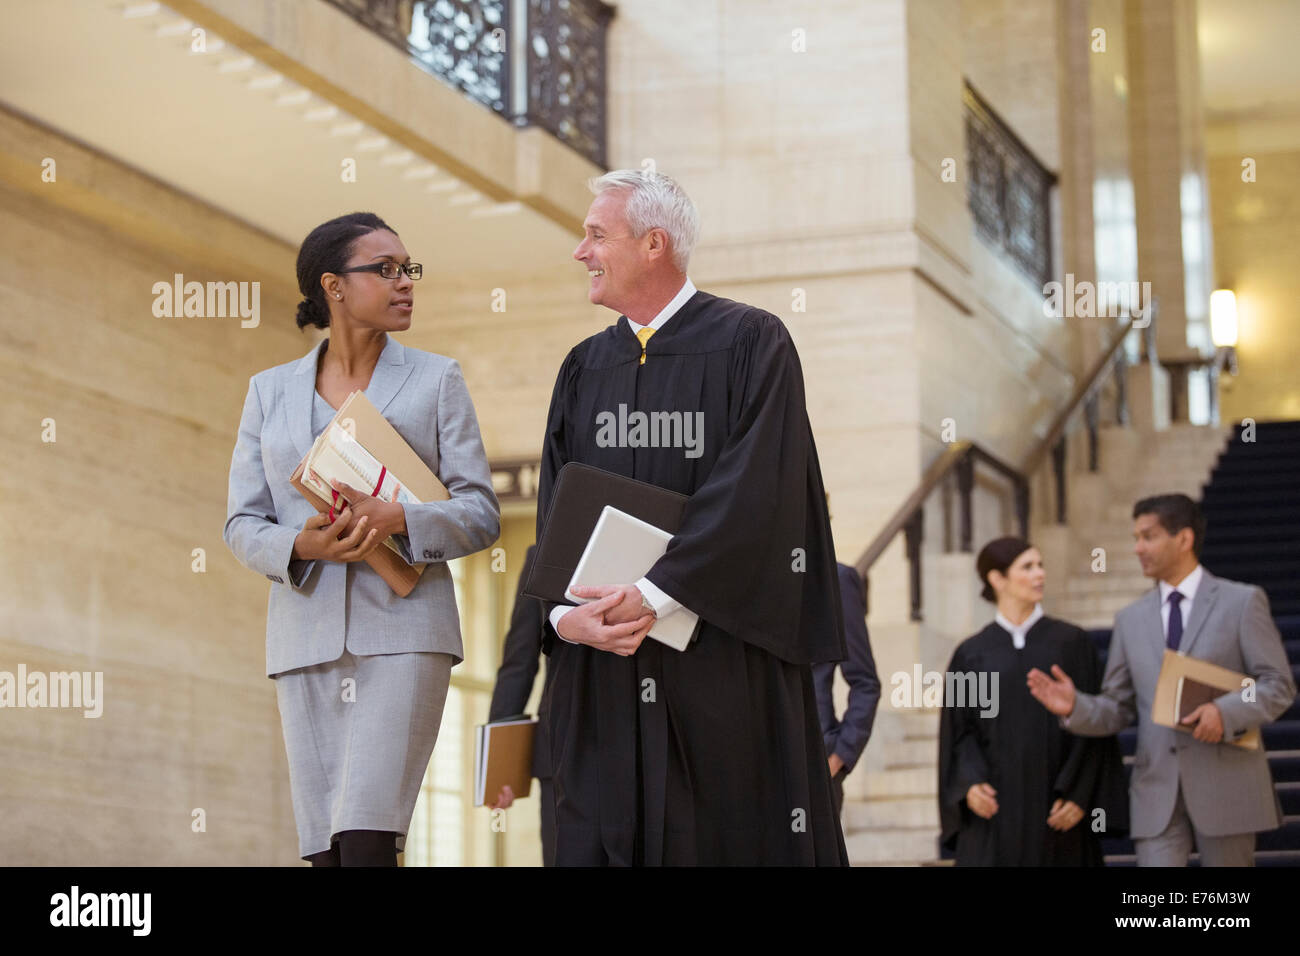 Judge and lawyer walking through courthouse together Stock Photo